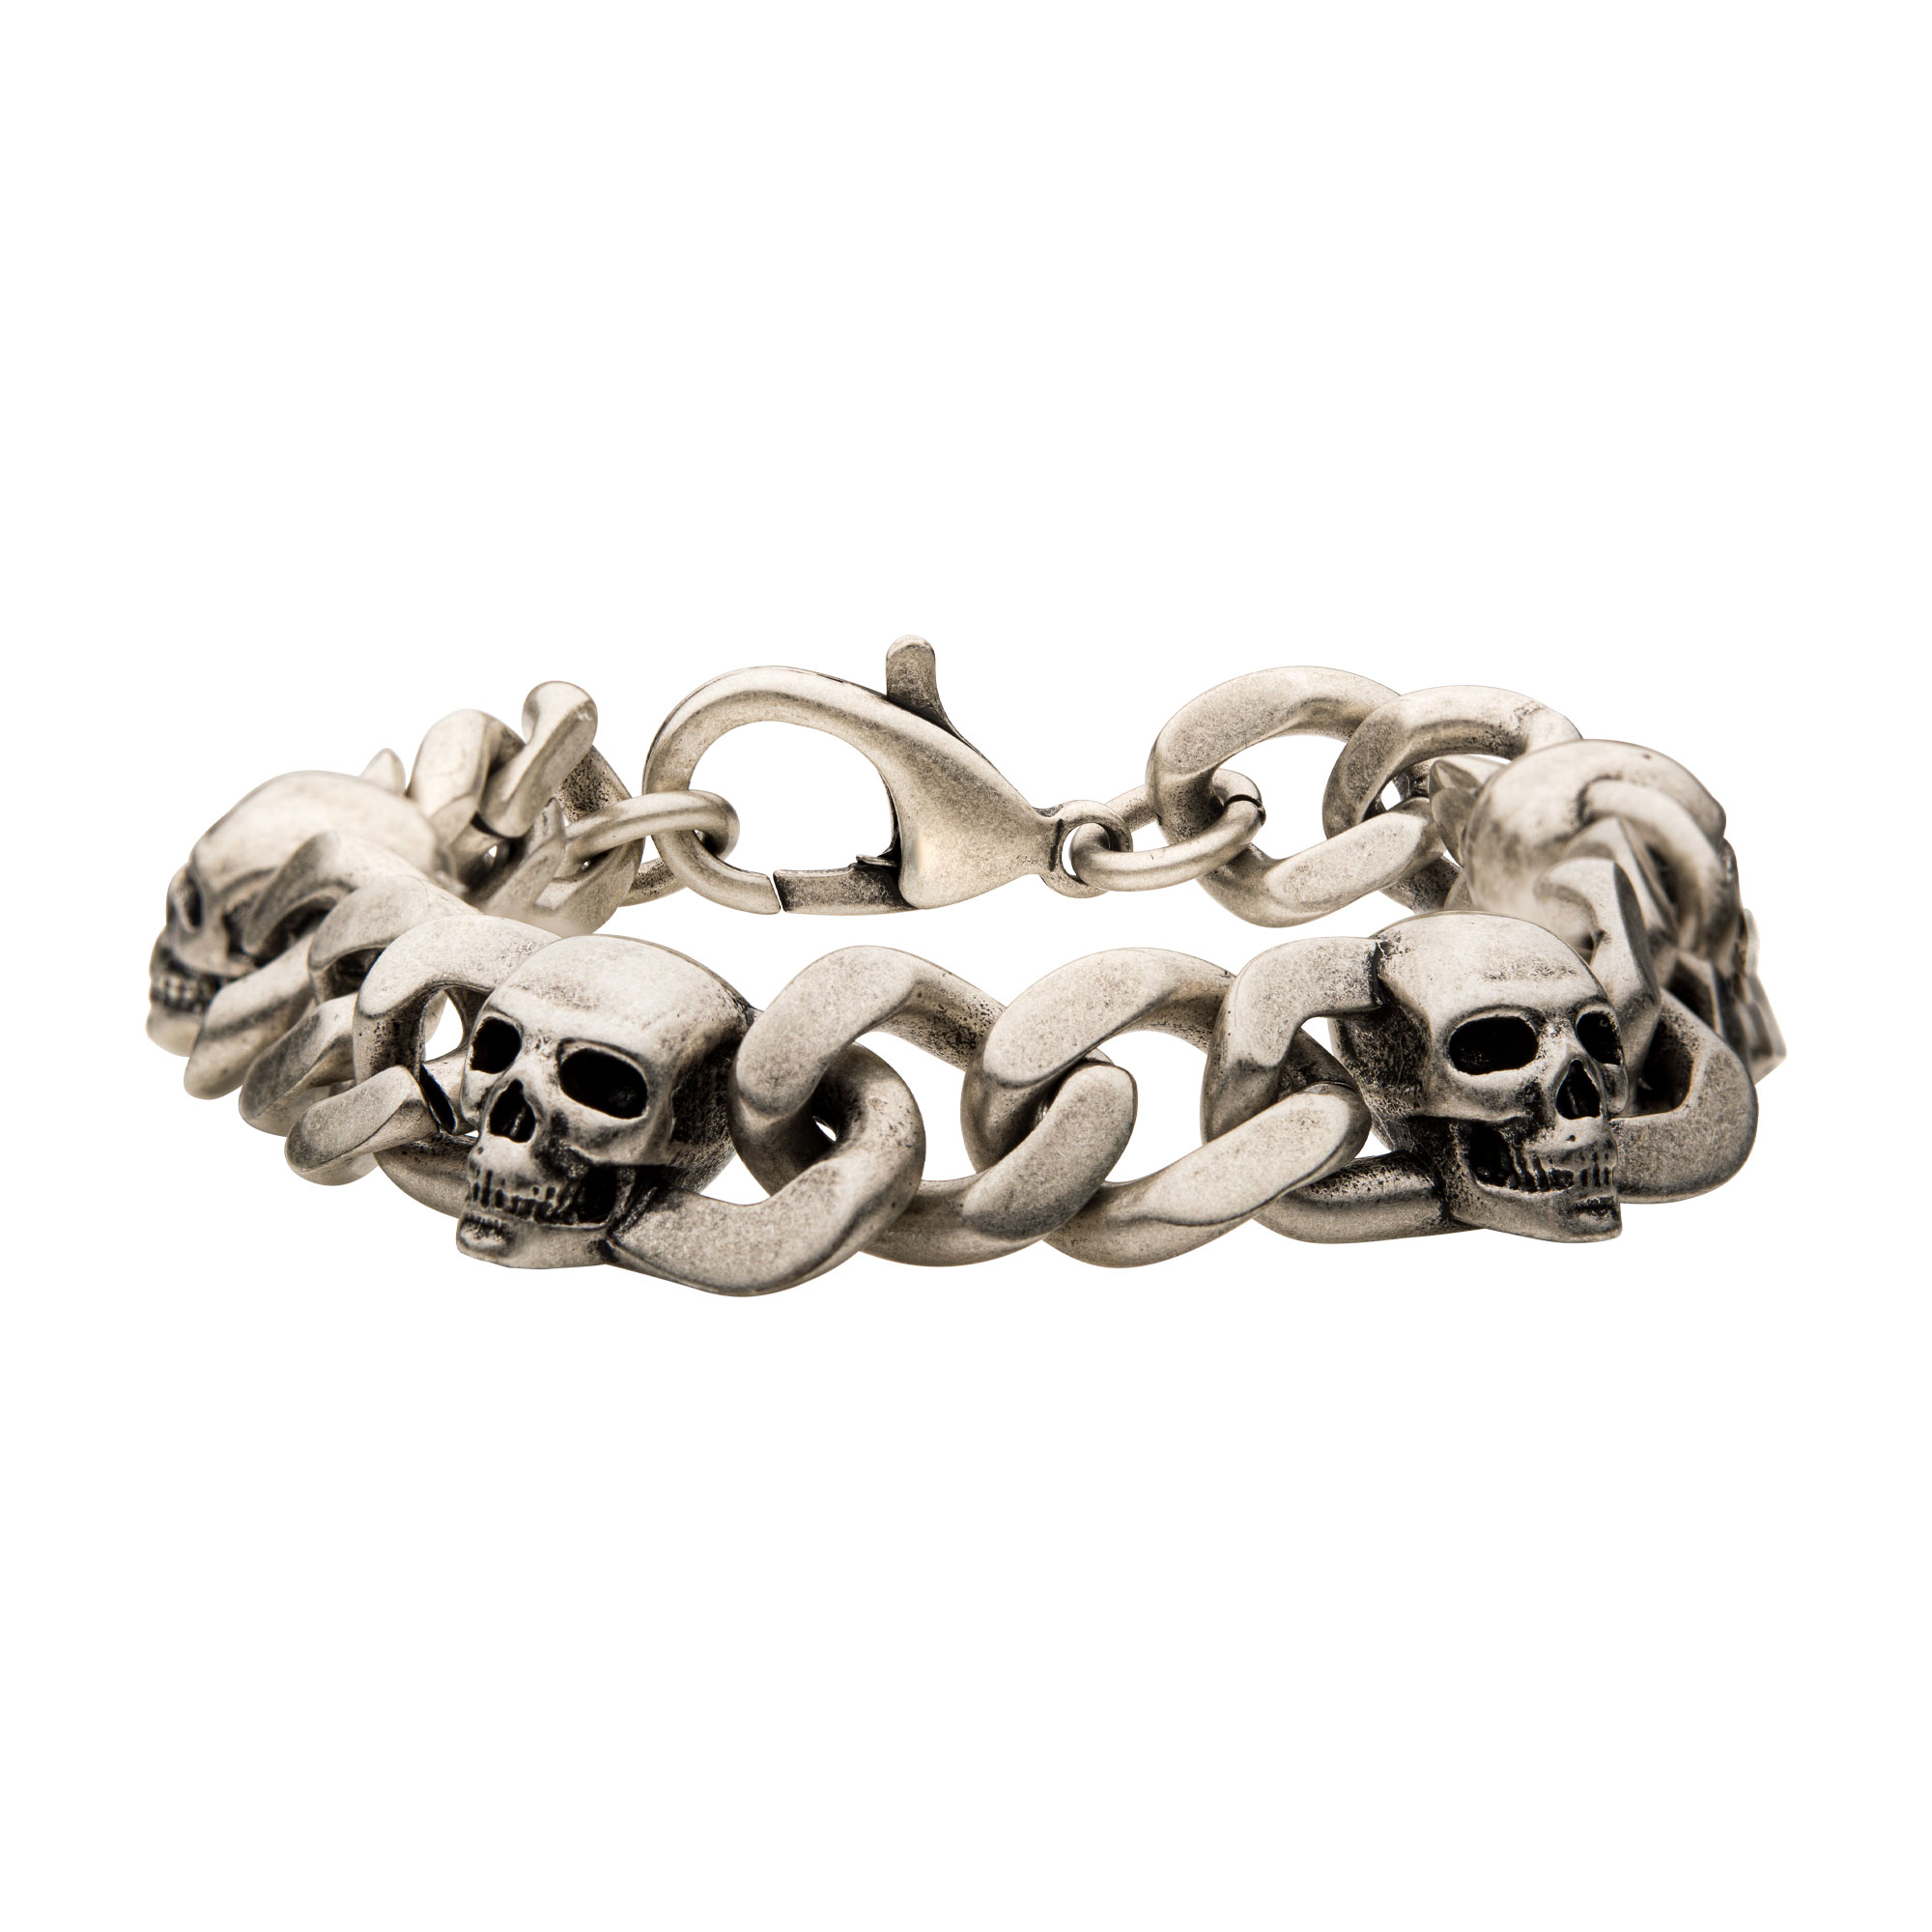 Stainless Steel Silver Plated with Skull Design Chunky Chain Bracelet Midtown Diamonds Reno, NV